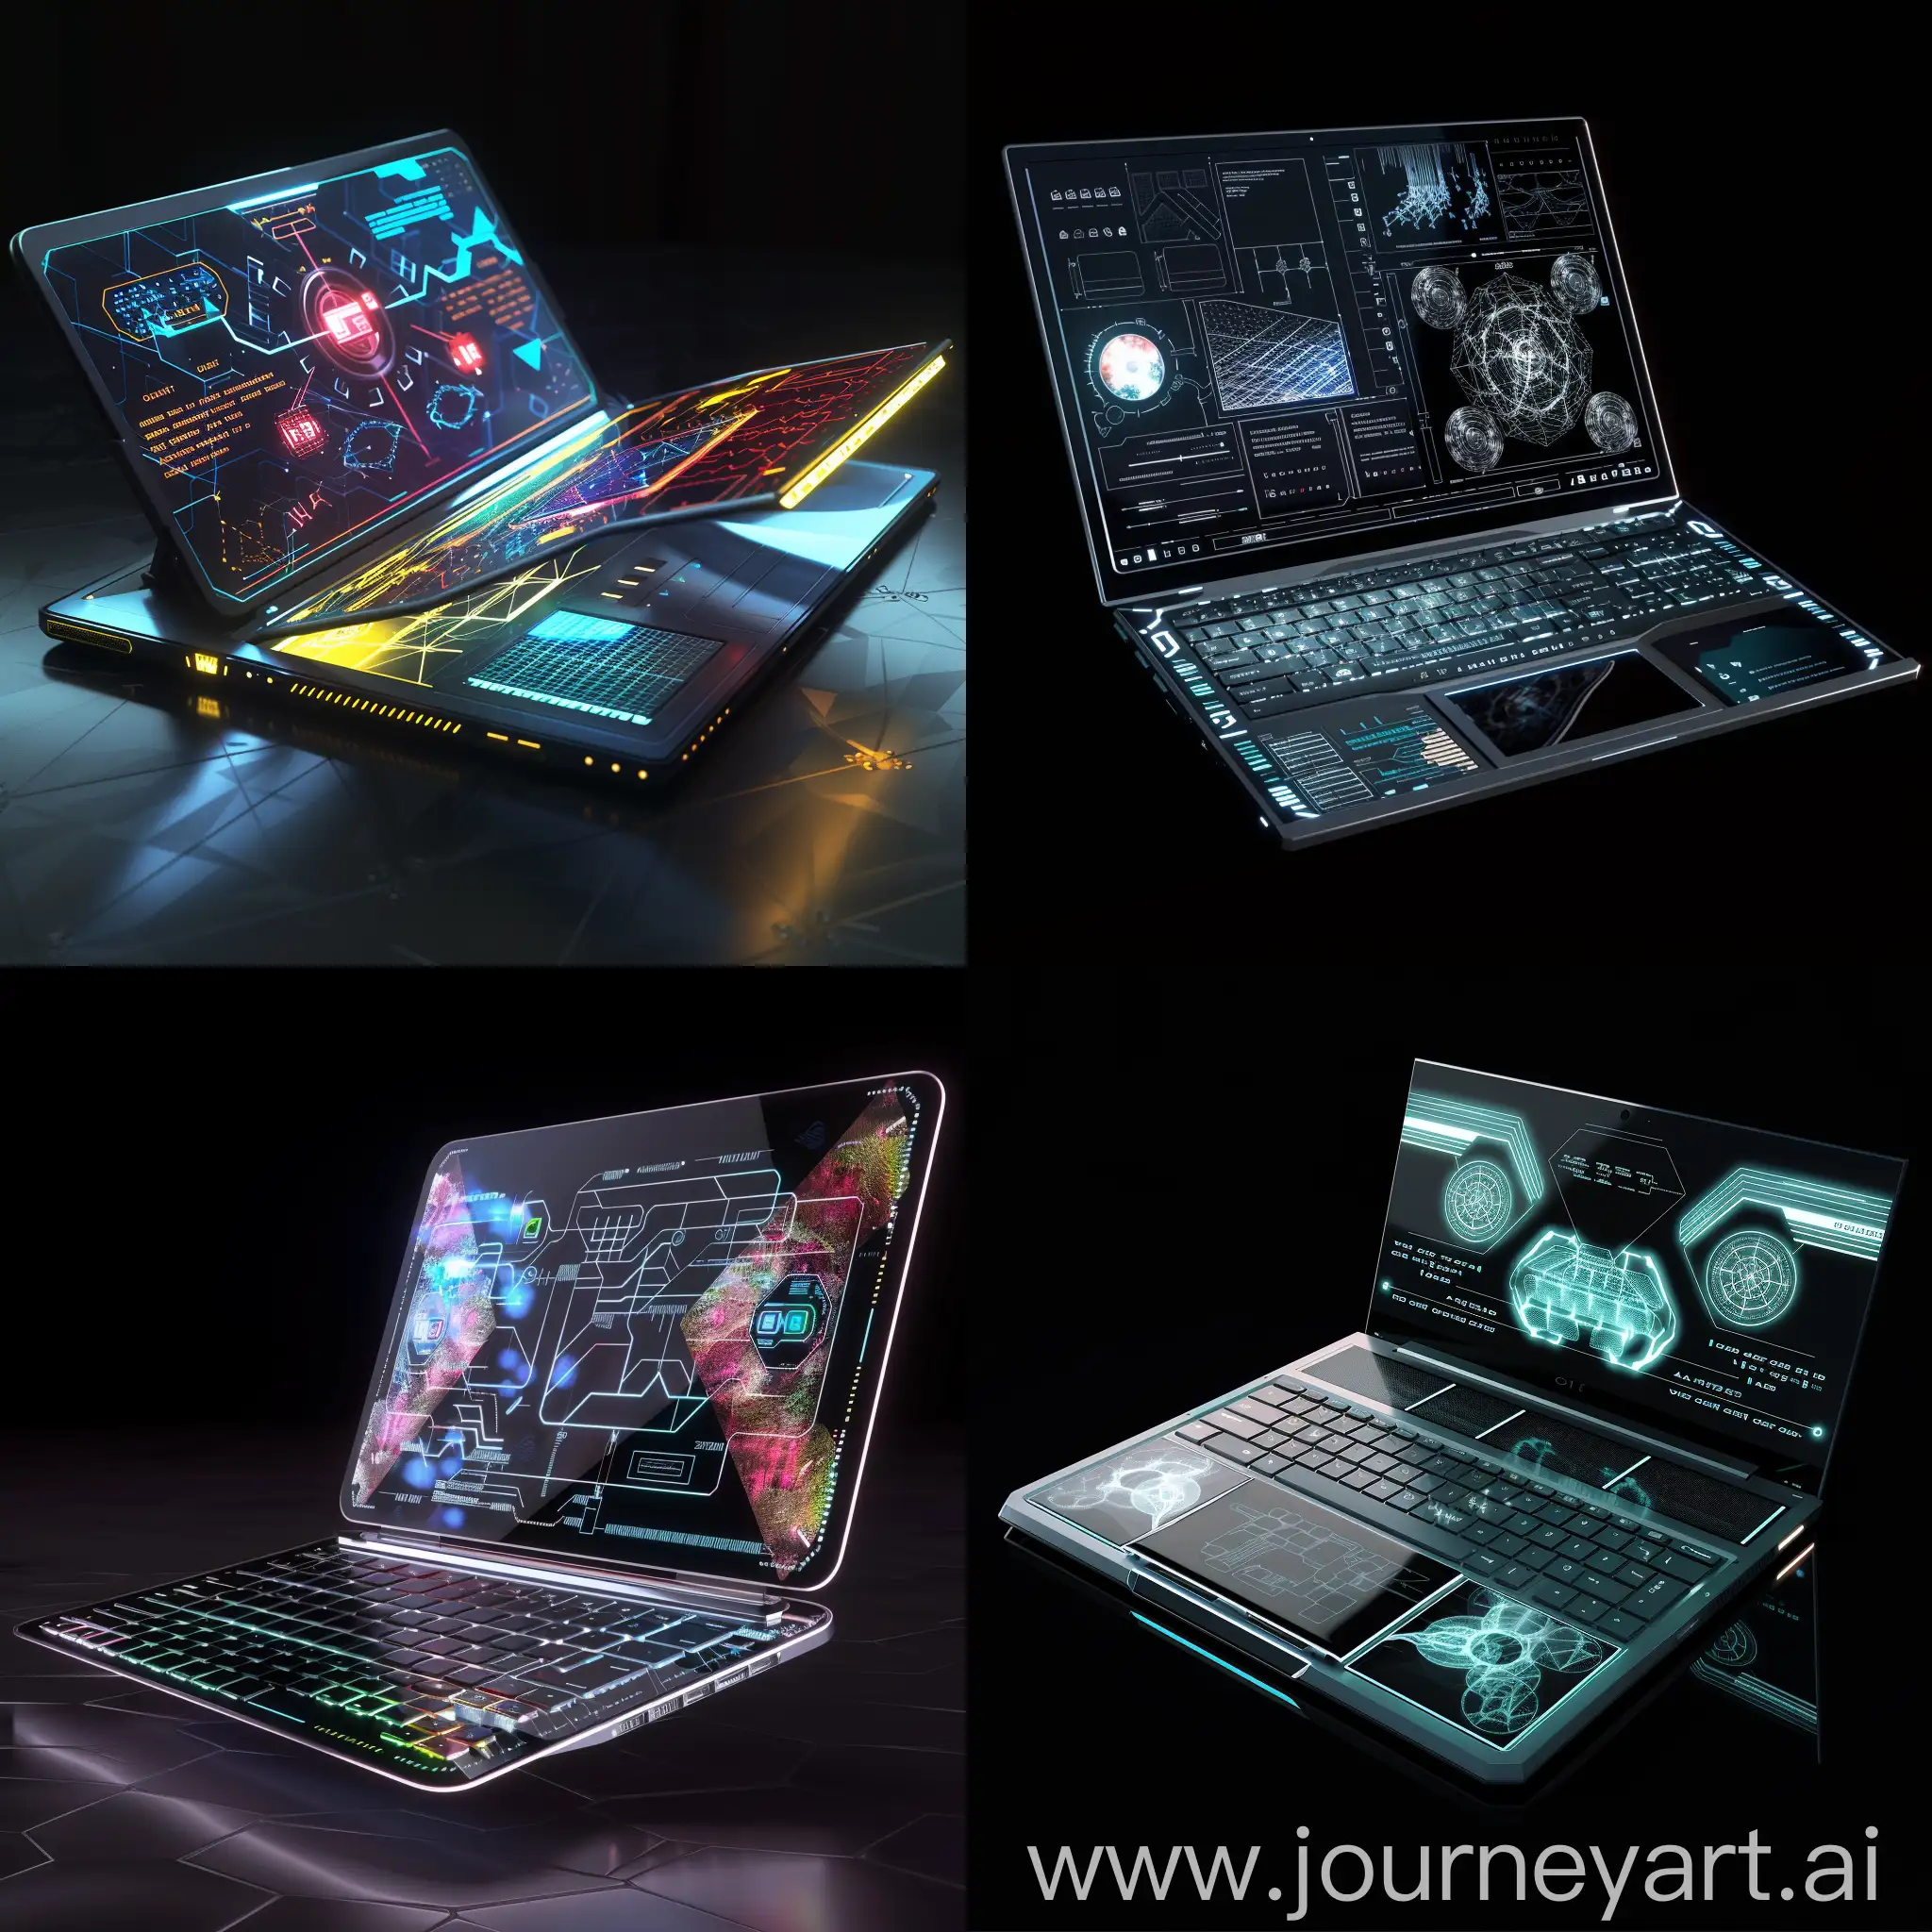 Futuristic-Quantum-Processing-Laptop-with-Flexible-Displays-and-Holographic-Keyboards